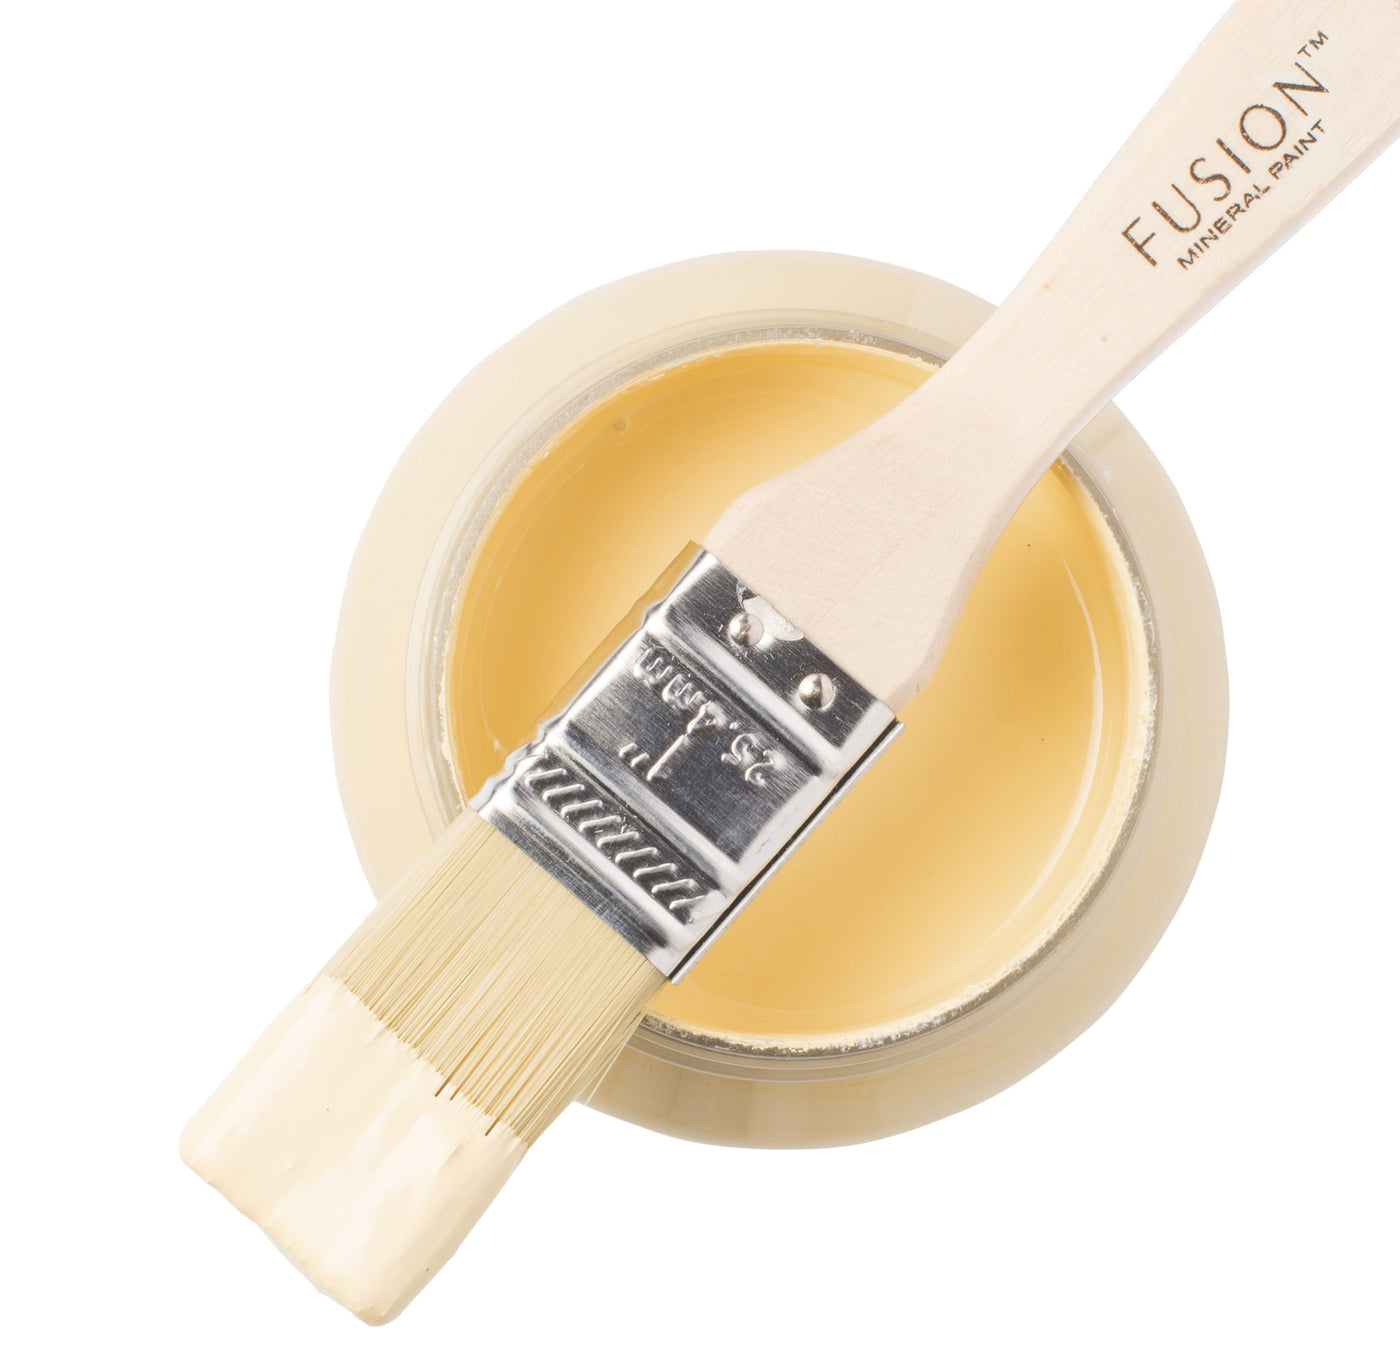 Soft yellow paint can and brush from Fusion Mineral Paint